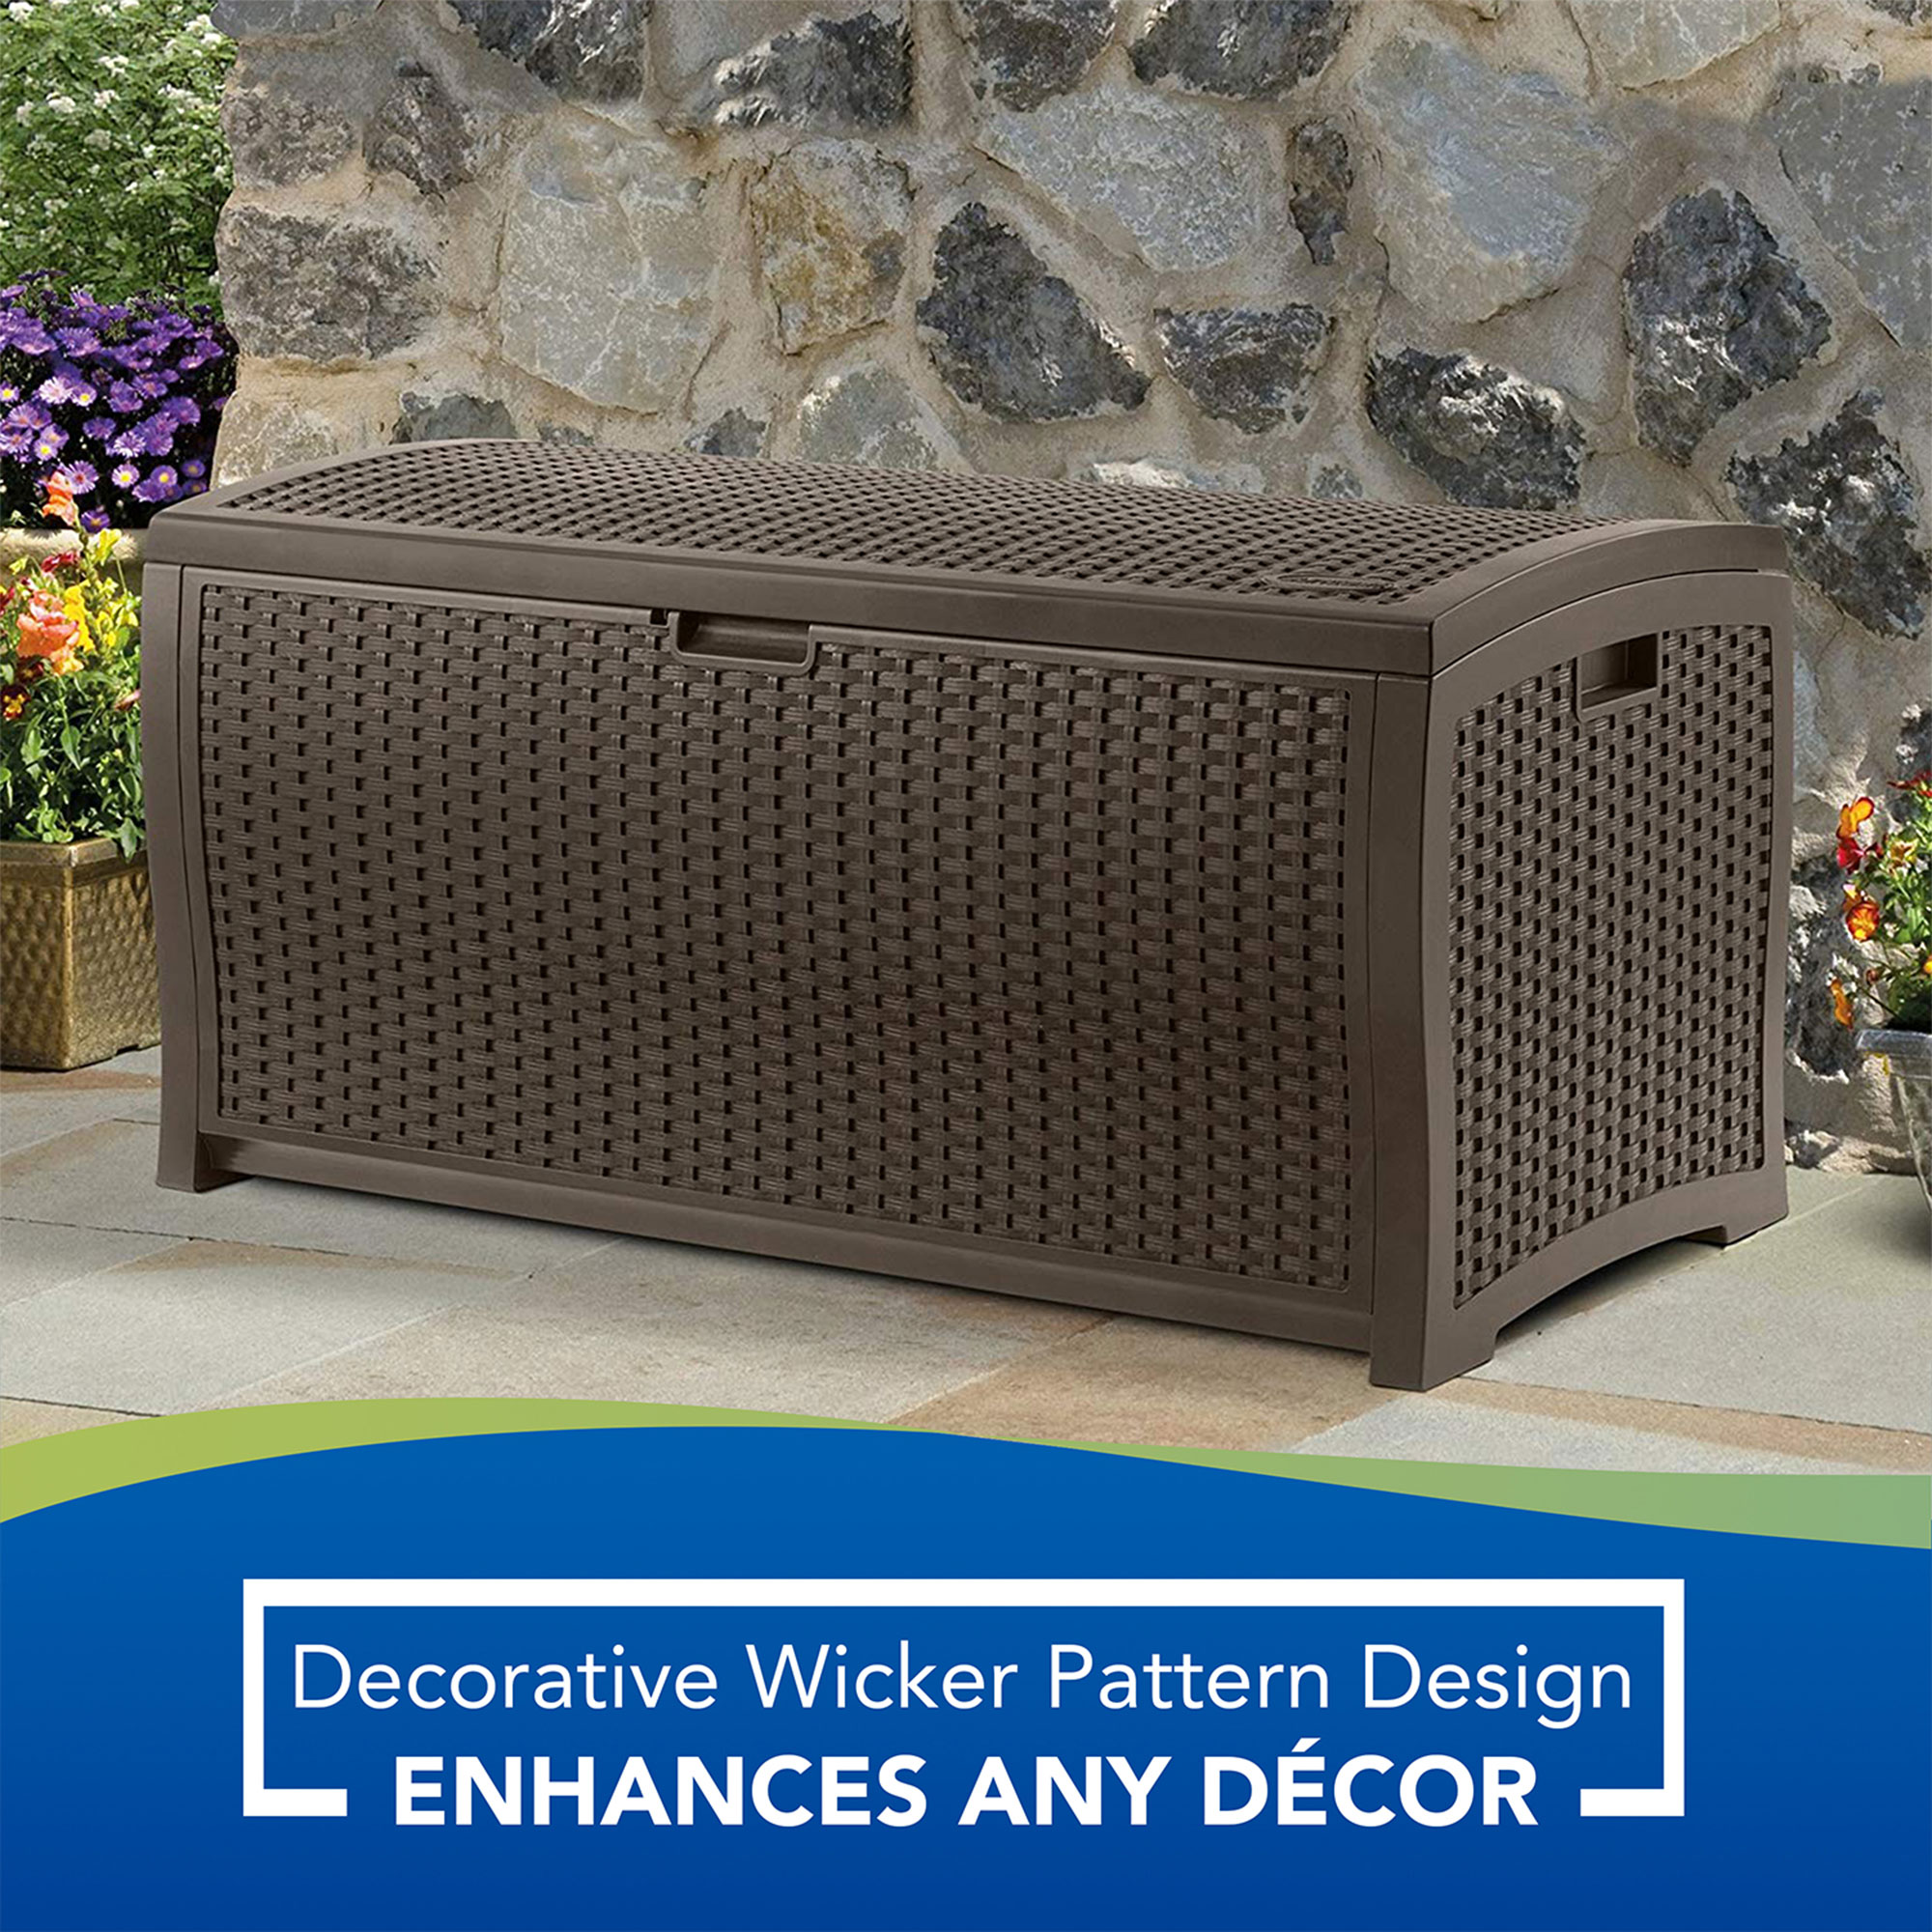 Suncast Indoor and Outdoor 73 Gallon Resin Deck Box with Seat, Mocha Brown, 46 in D x 22.5 in H x 21.6 in W - image 6 of 8